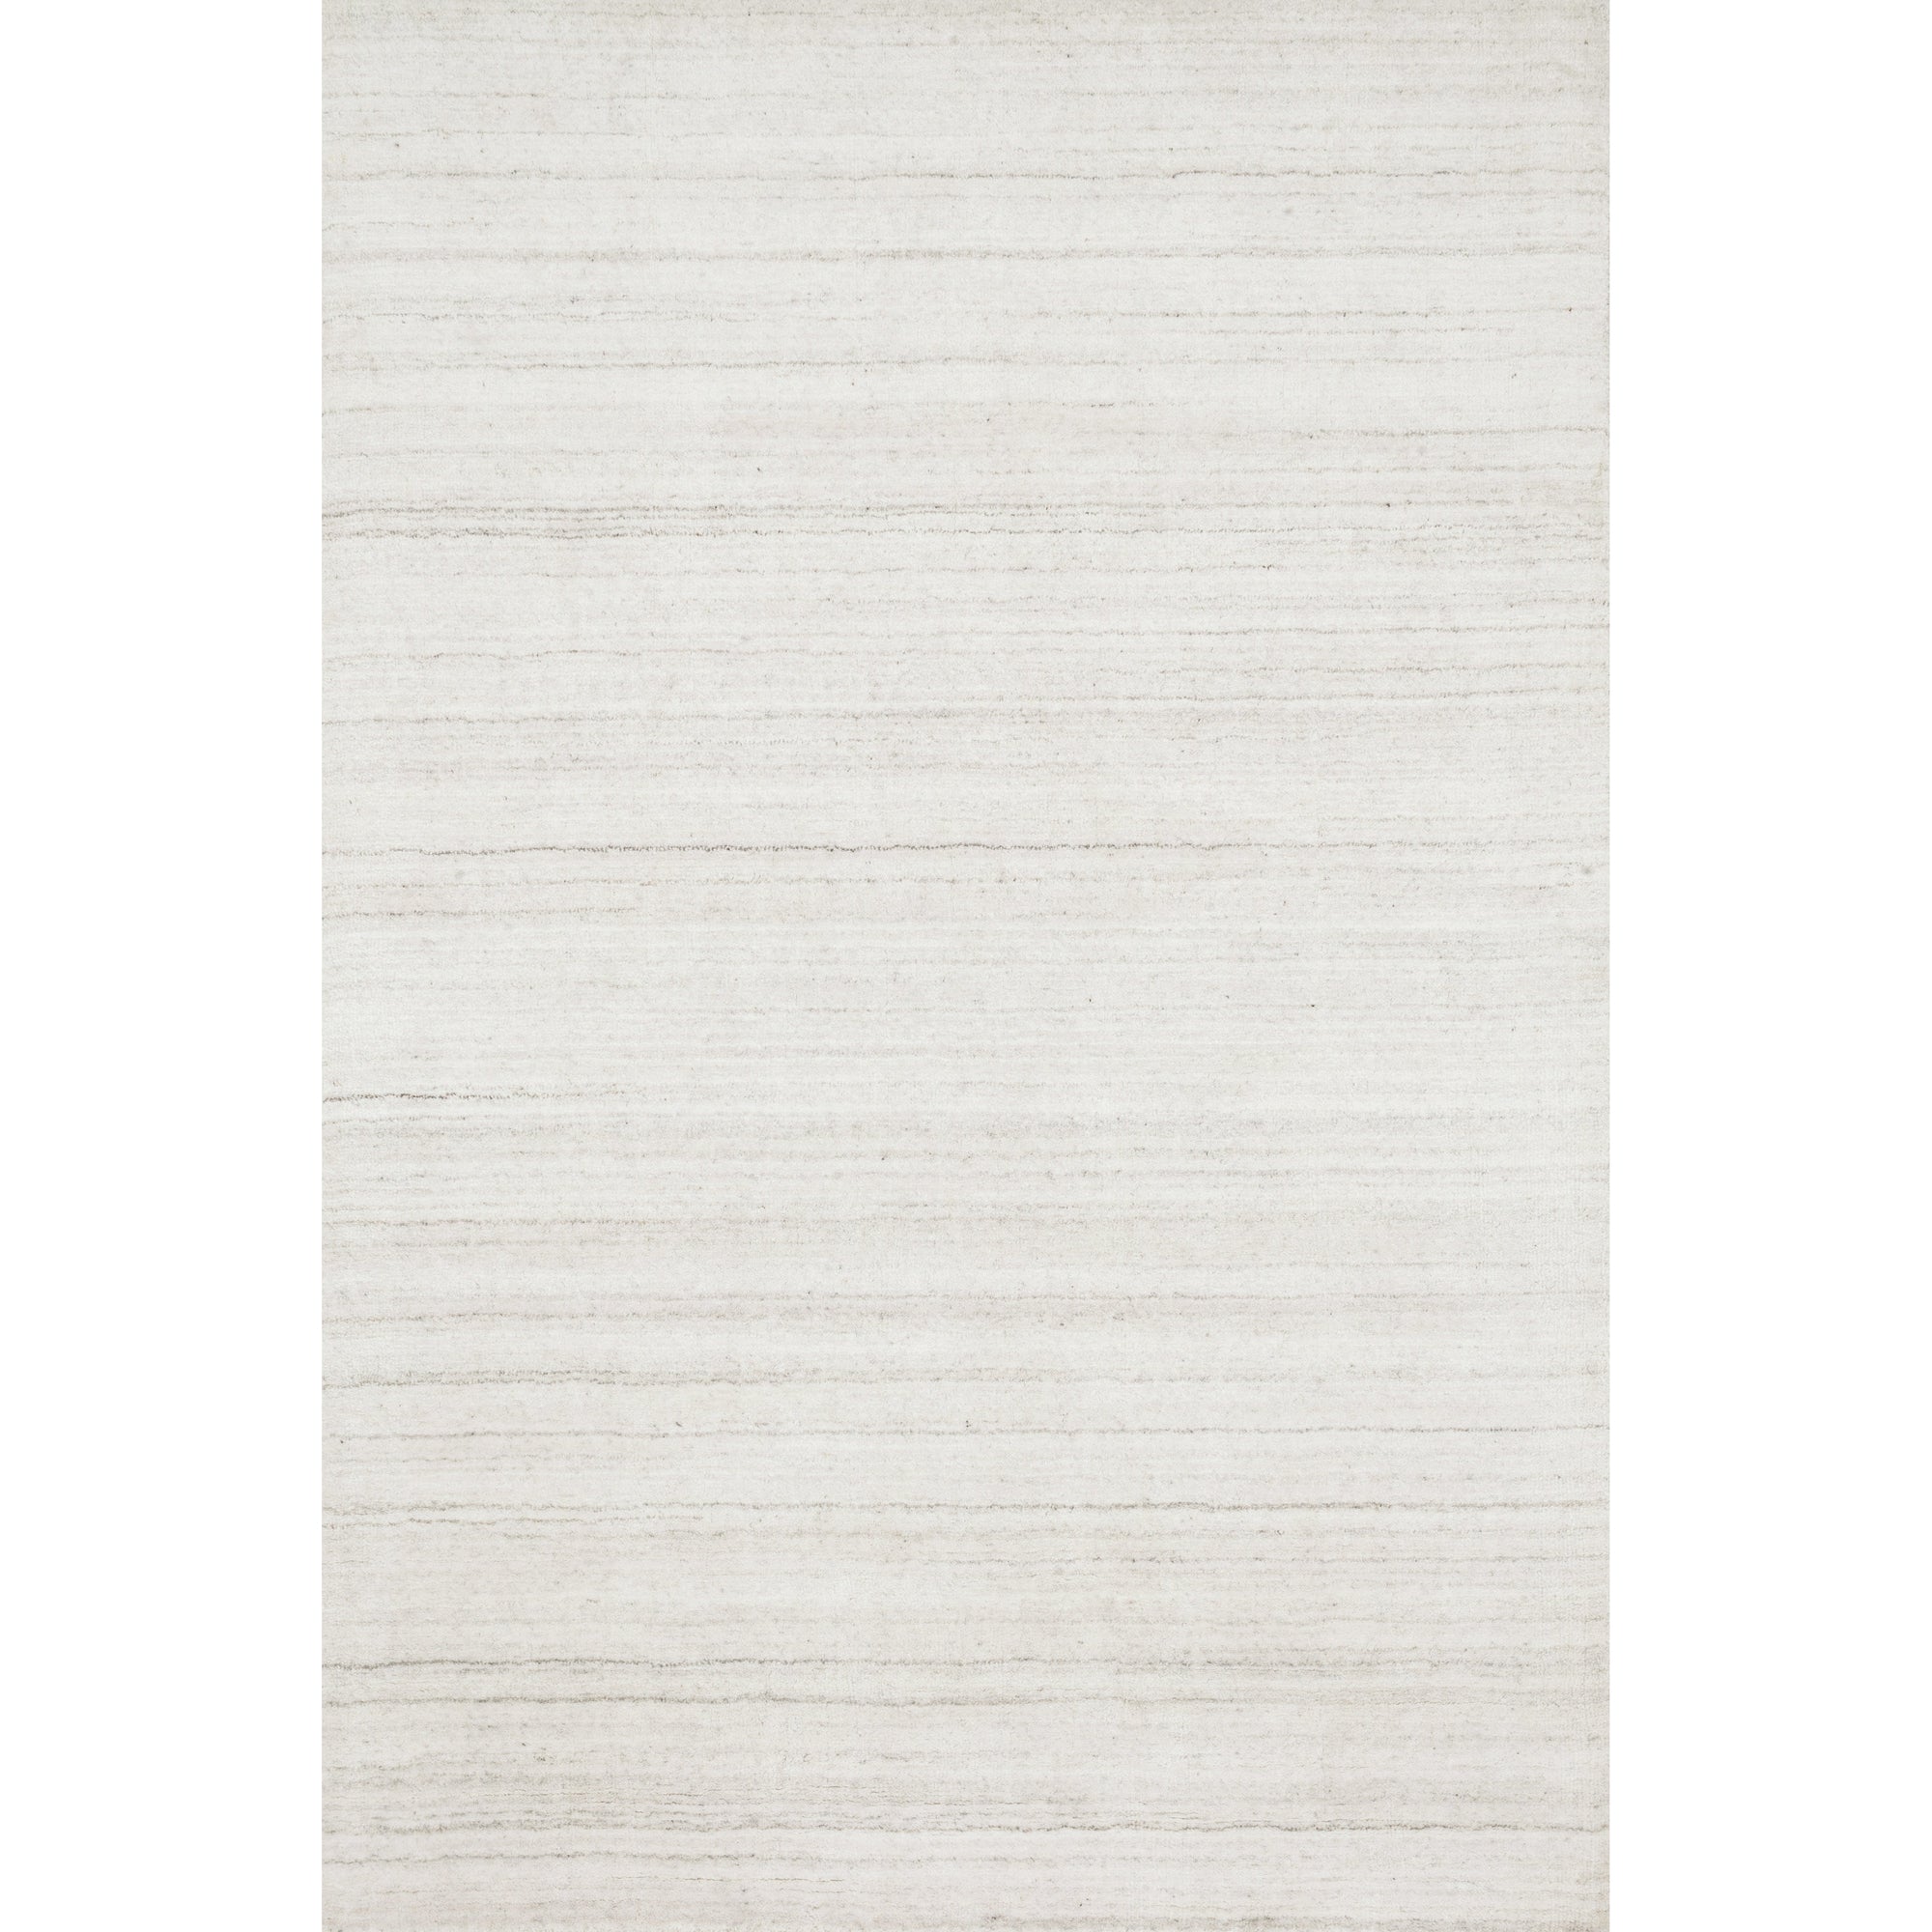 Rugs by Roo Loloi Barkley Ivory Area Rug in size 3' 6" x 5' 6"